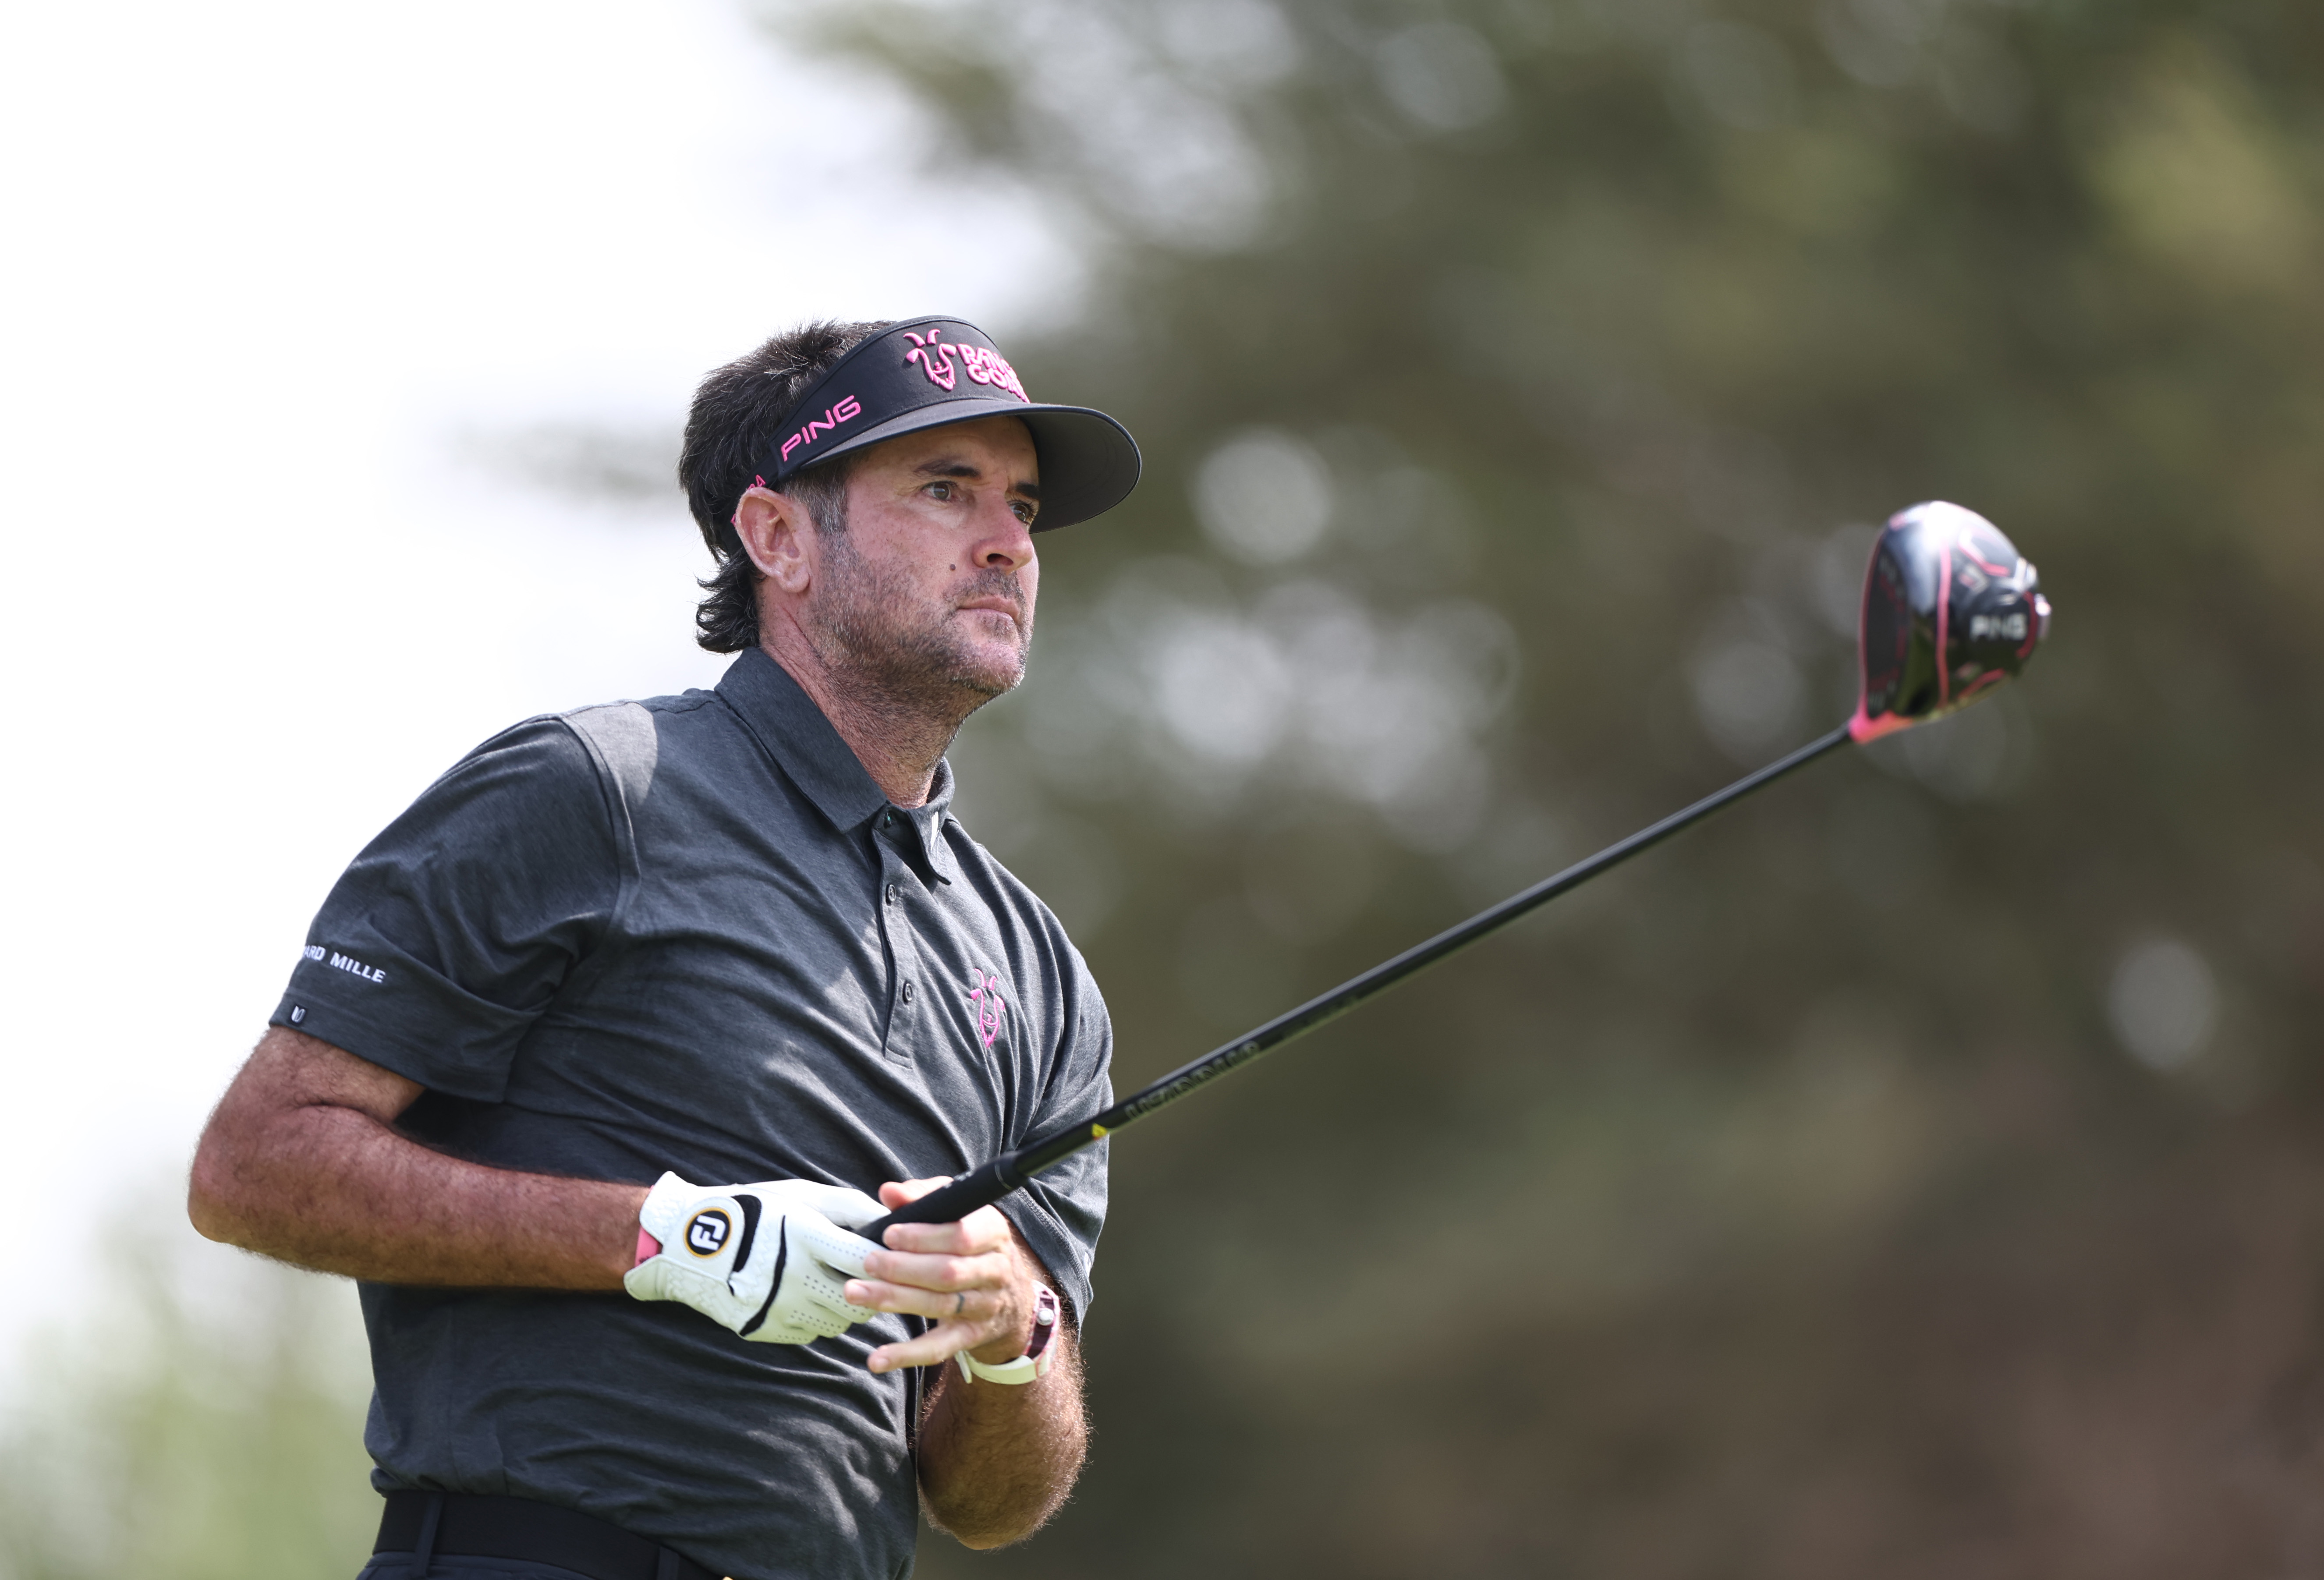 Bubba Watson what's in the bag?